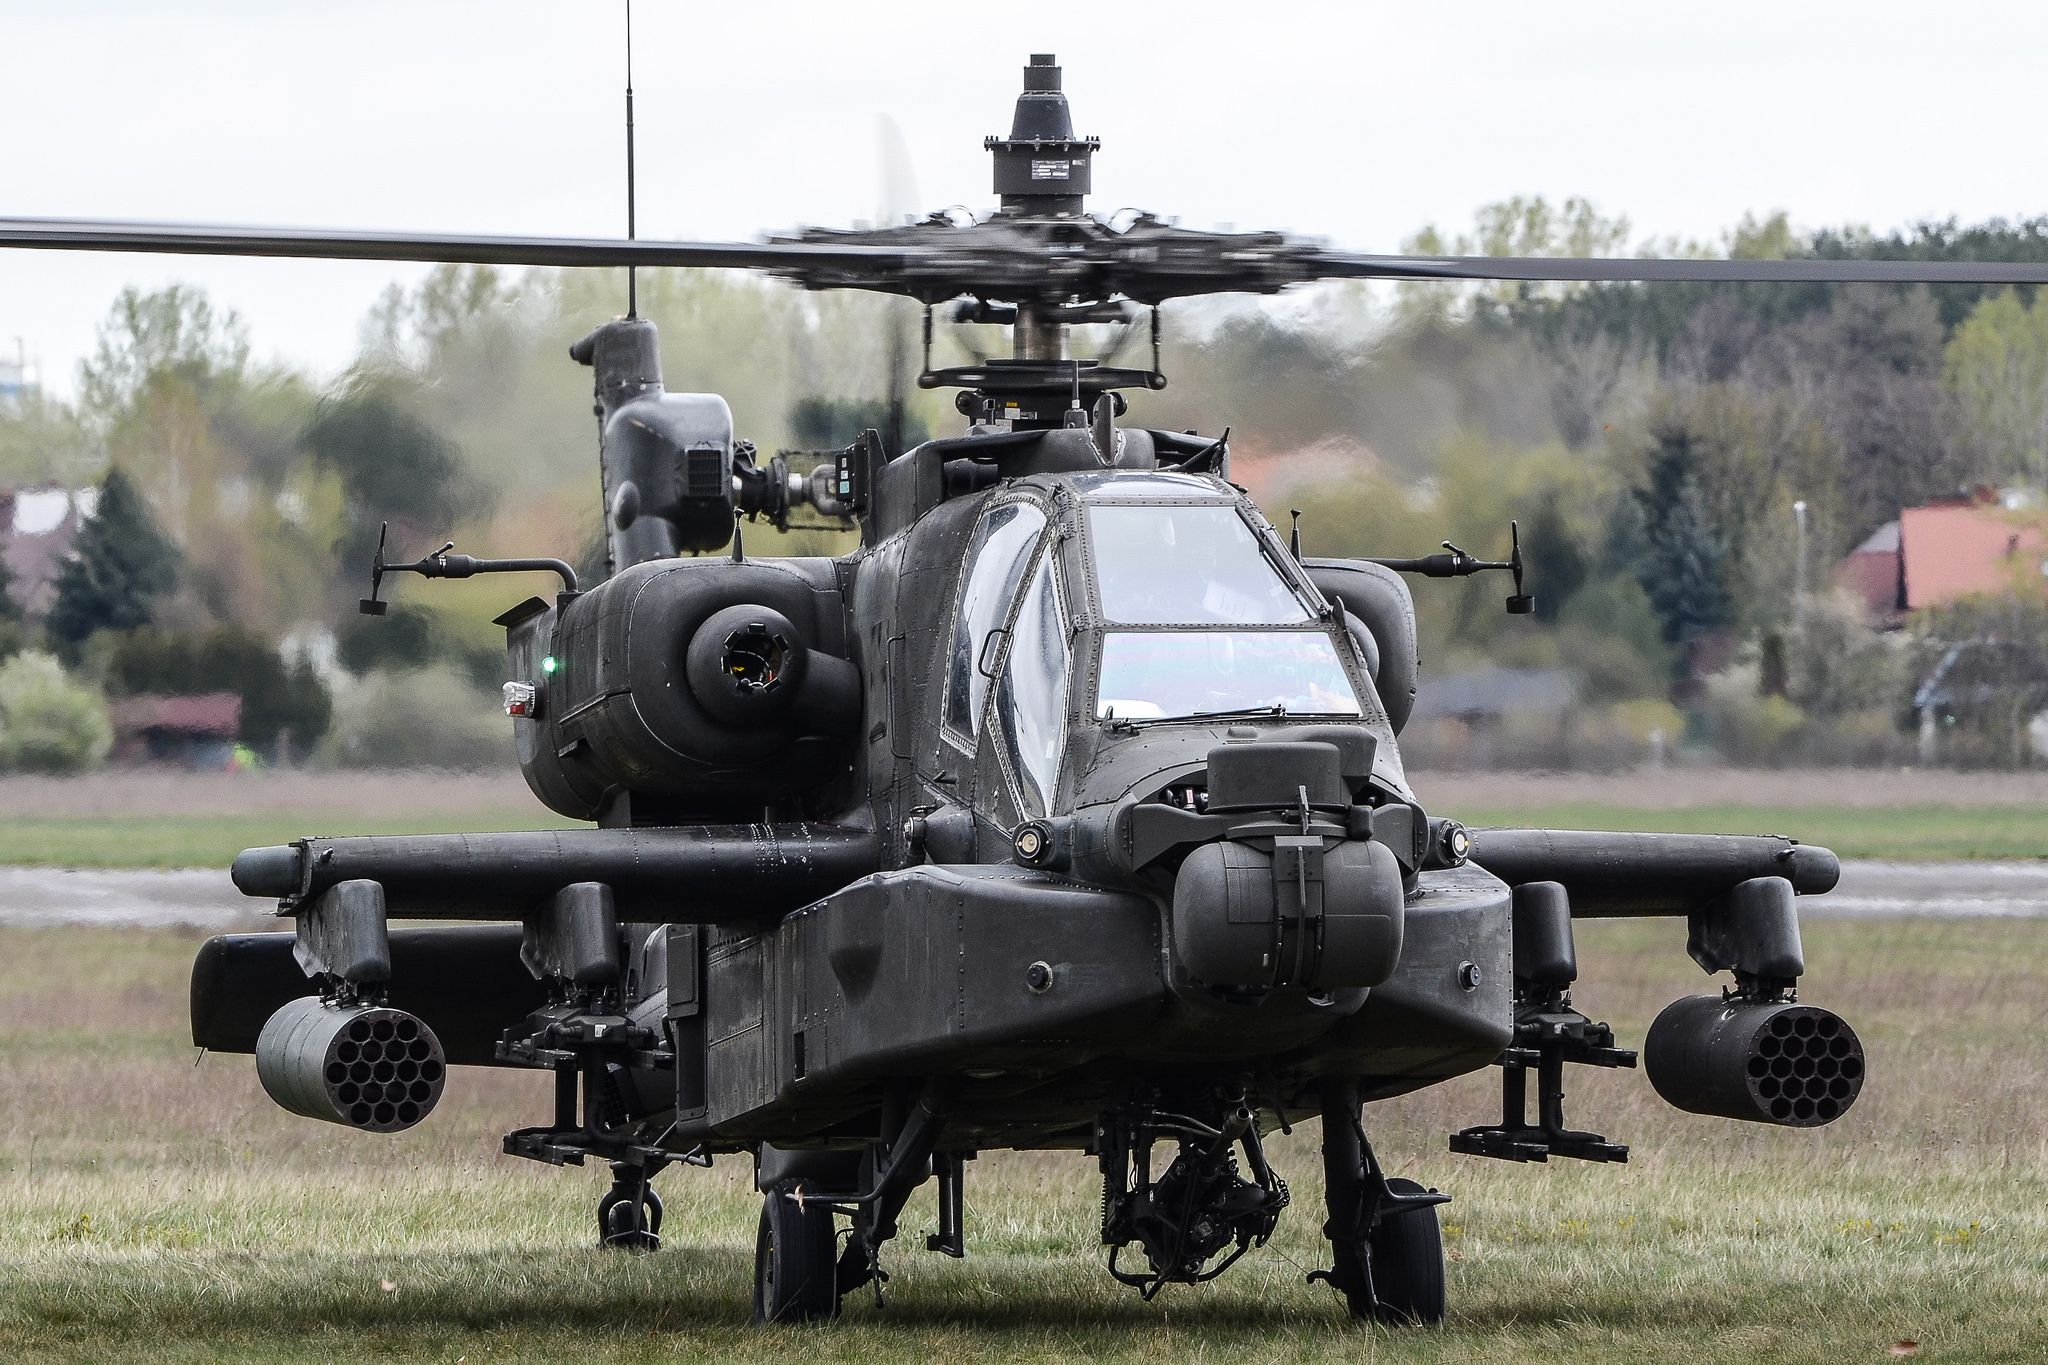 Boeing AH 64 D Apache Longbow / 03 05388 / US Army / EPBC Warsaw Babice. Military Helicopter, Ah 64 Apache, Military Aircraft